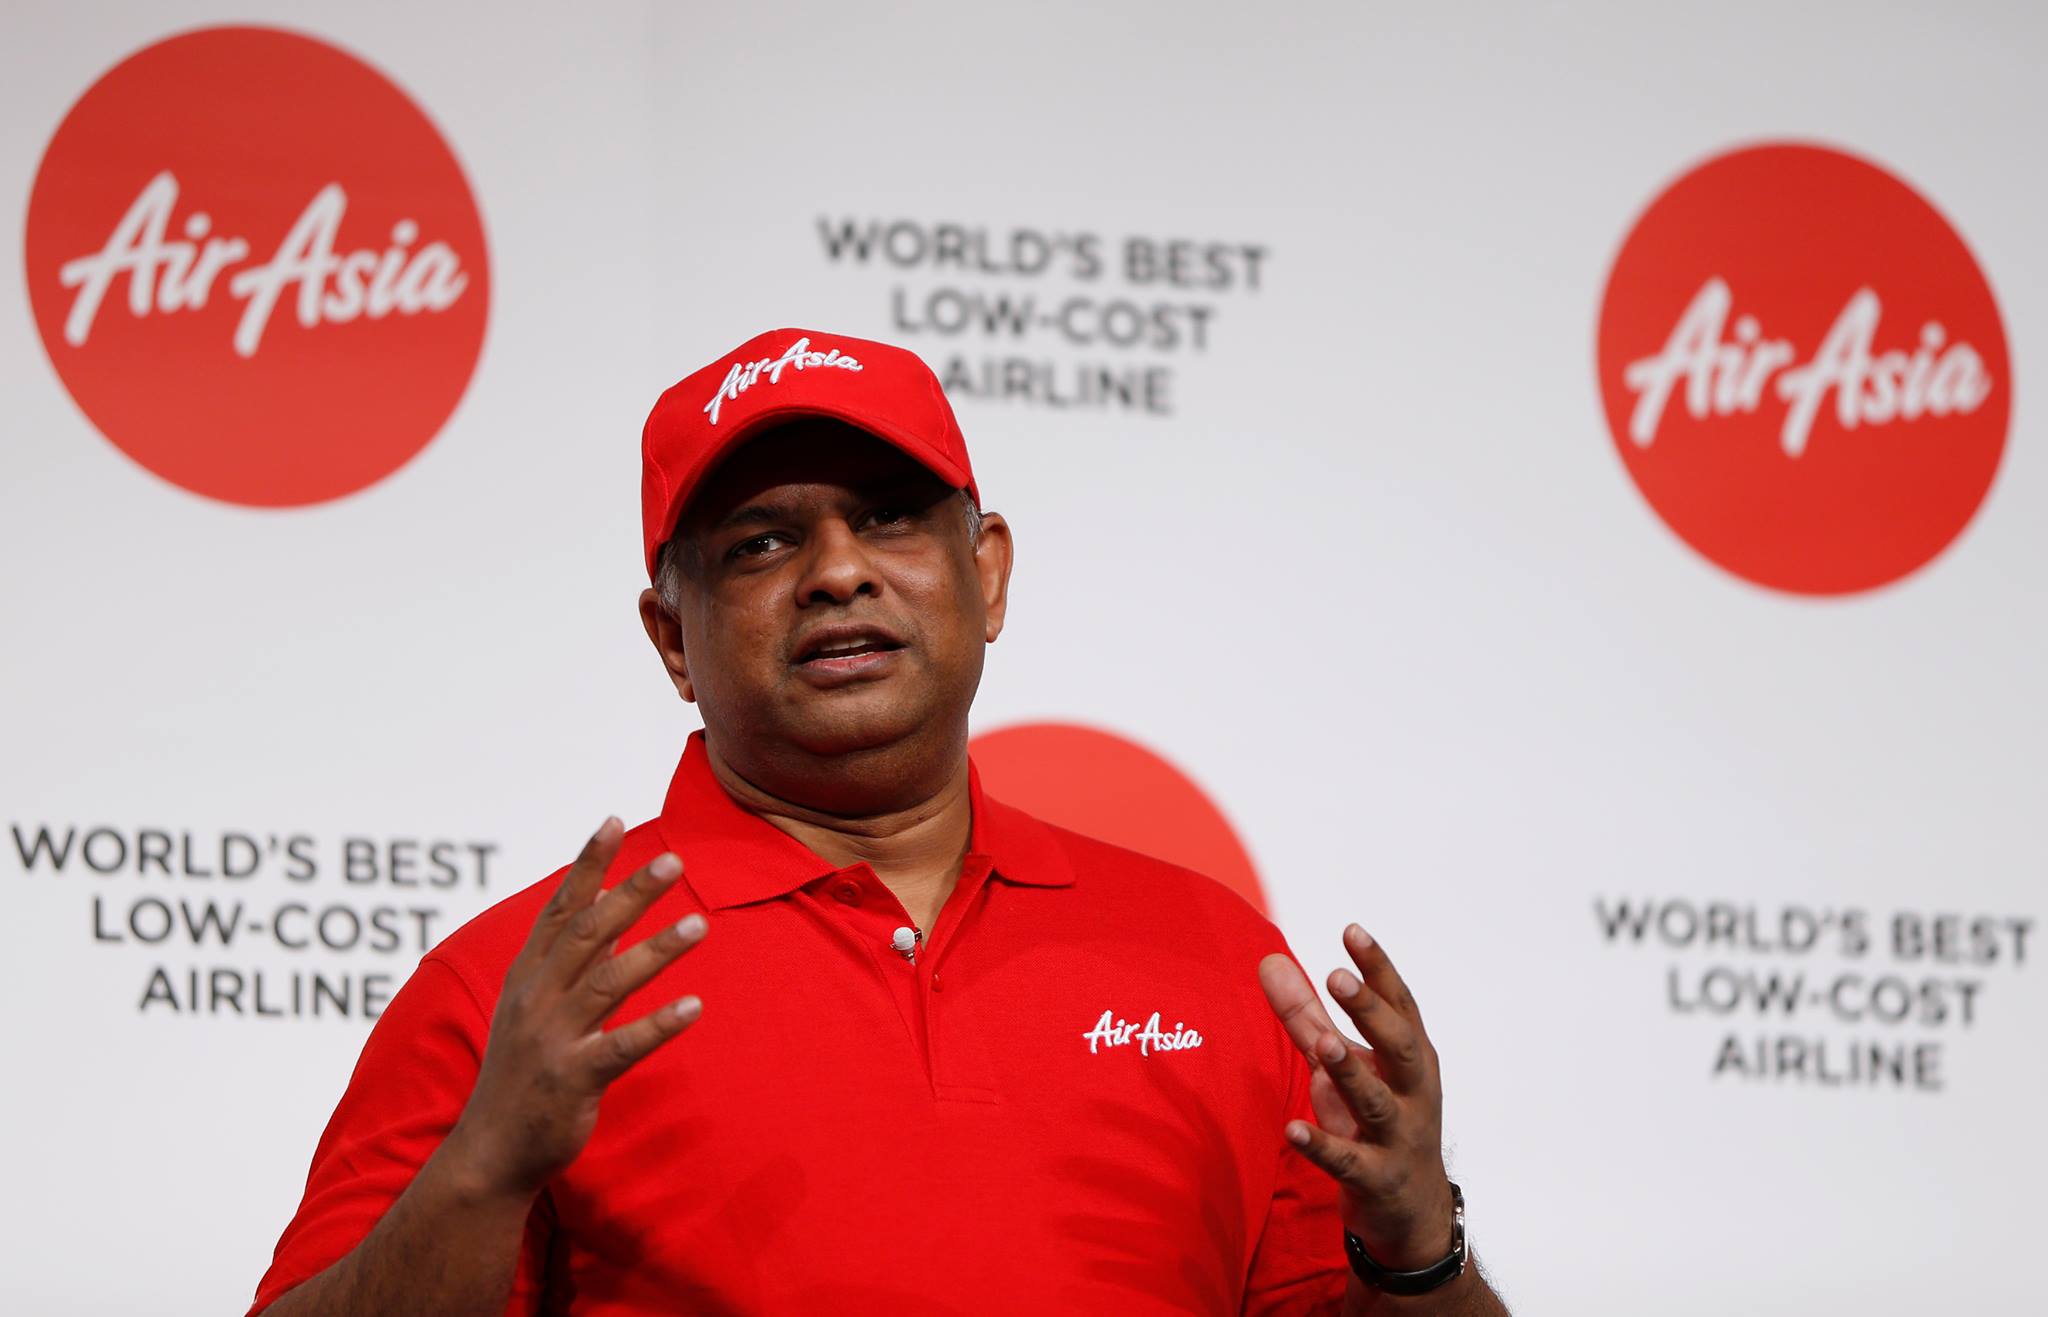 Tony Fernandes steps aside as CEO of AirAsia amidst bribery investigation